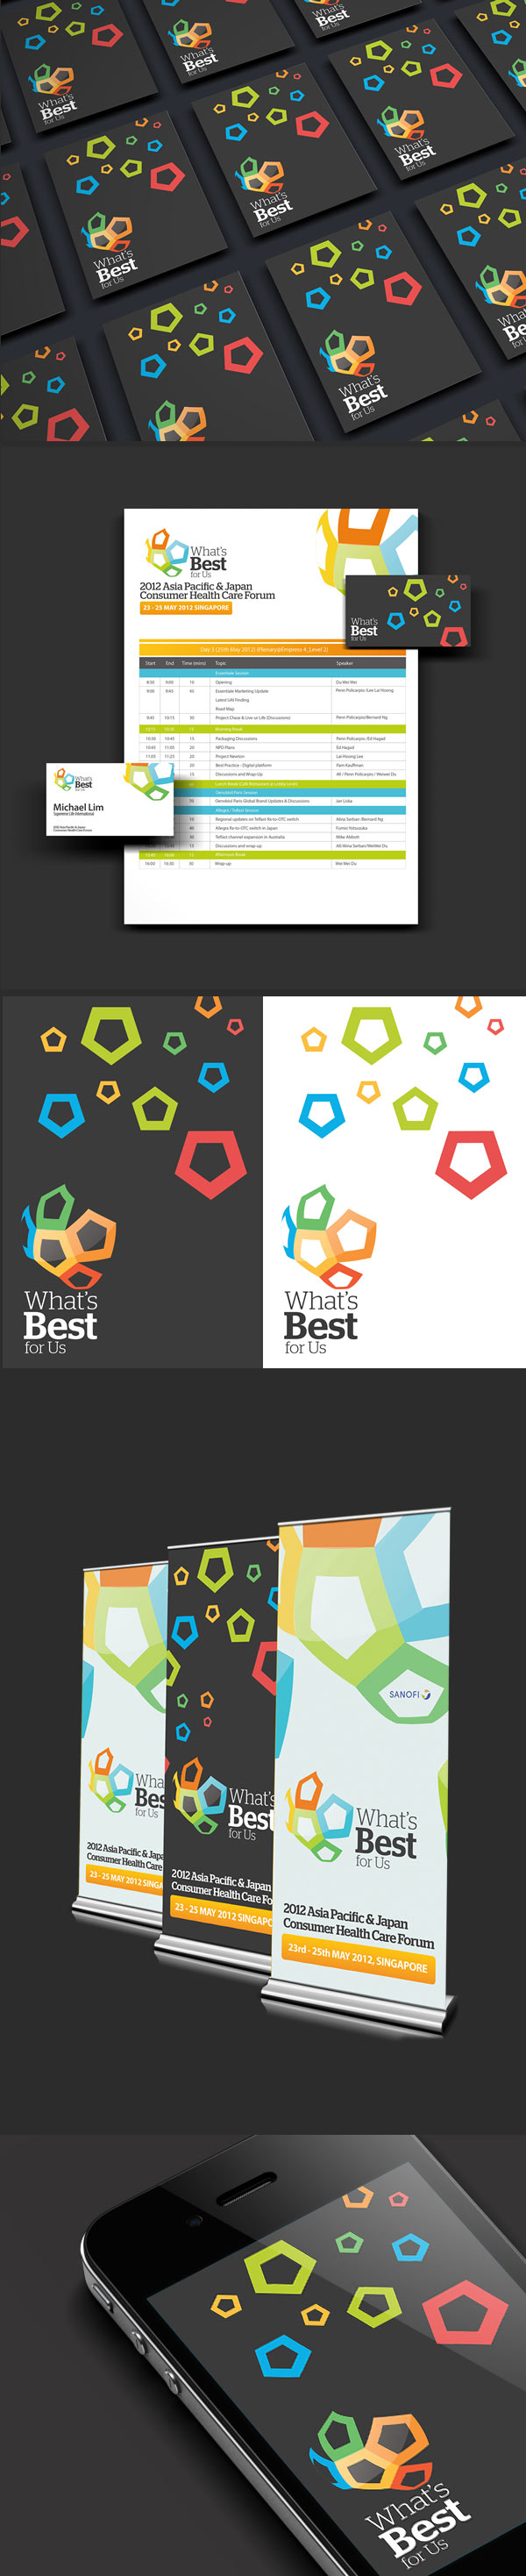 What's Best For Us - Visual Identity by Lemongraphic